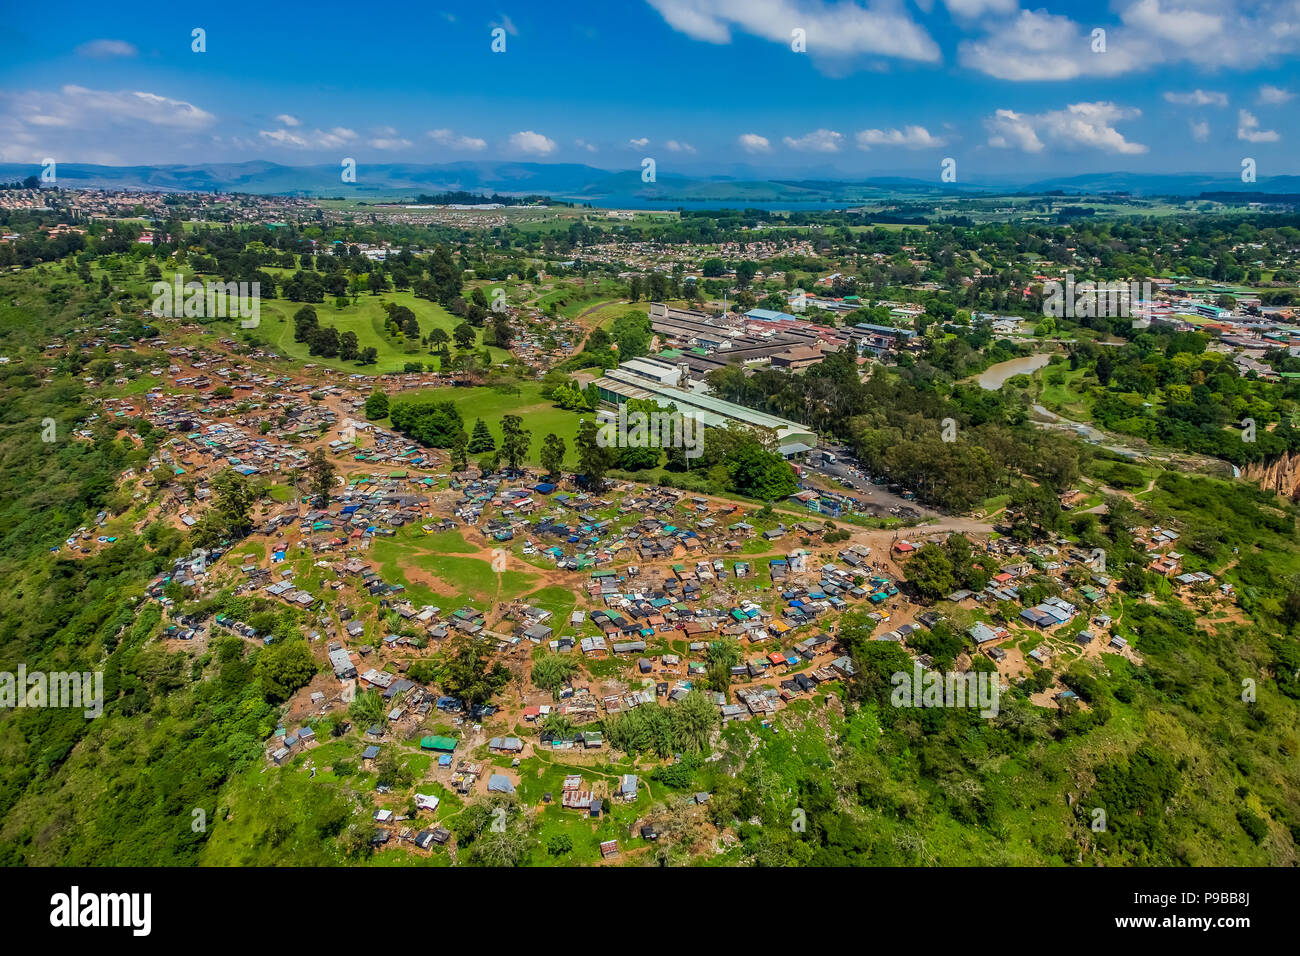 Howick, South Africa, October 19, 2012, Aerial View of Low income housing near Howick Falls KwaZulu-Natal South Africa Stock Photo